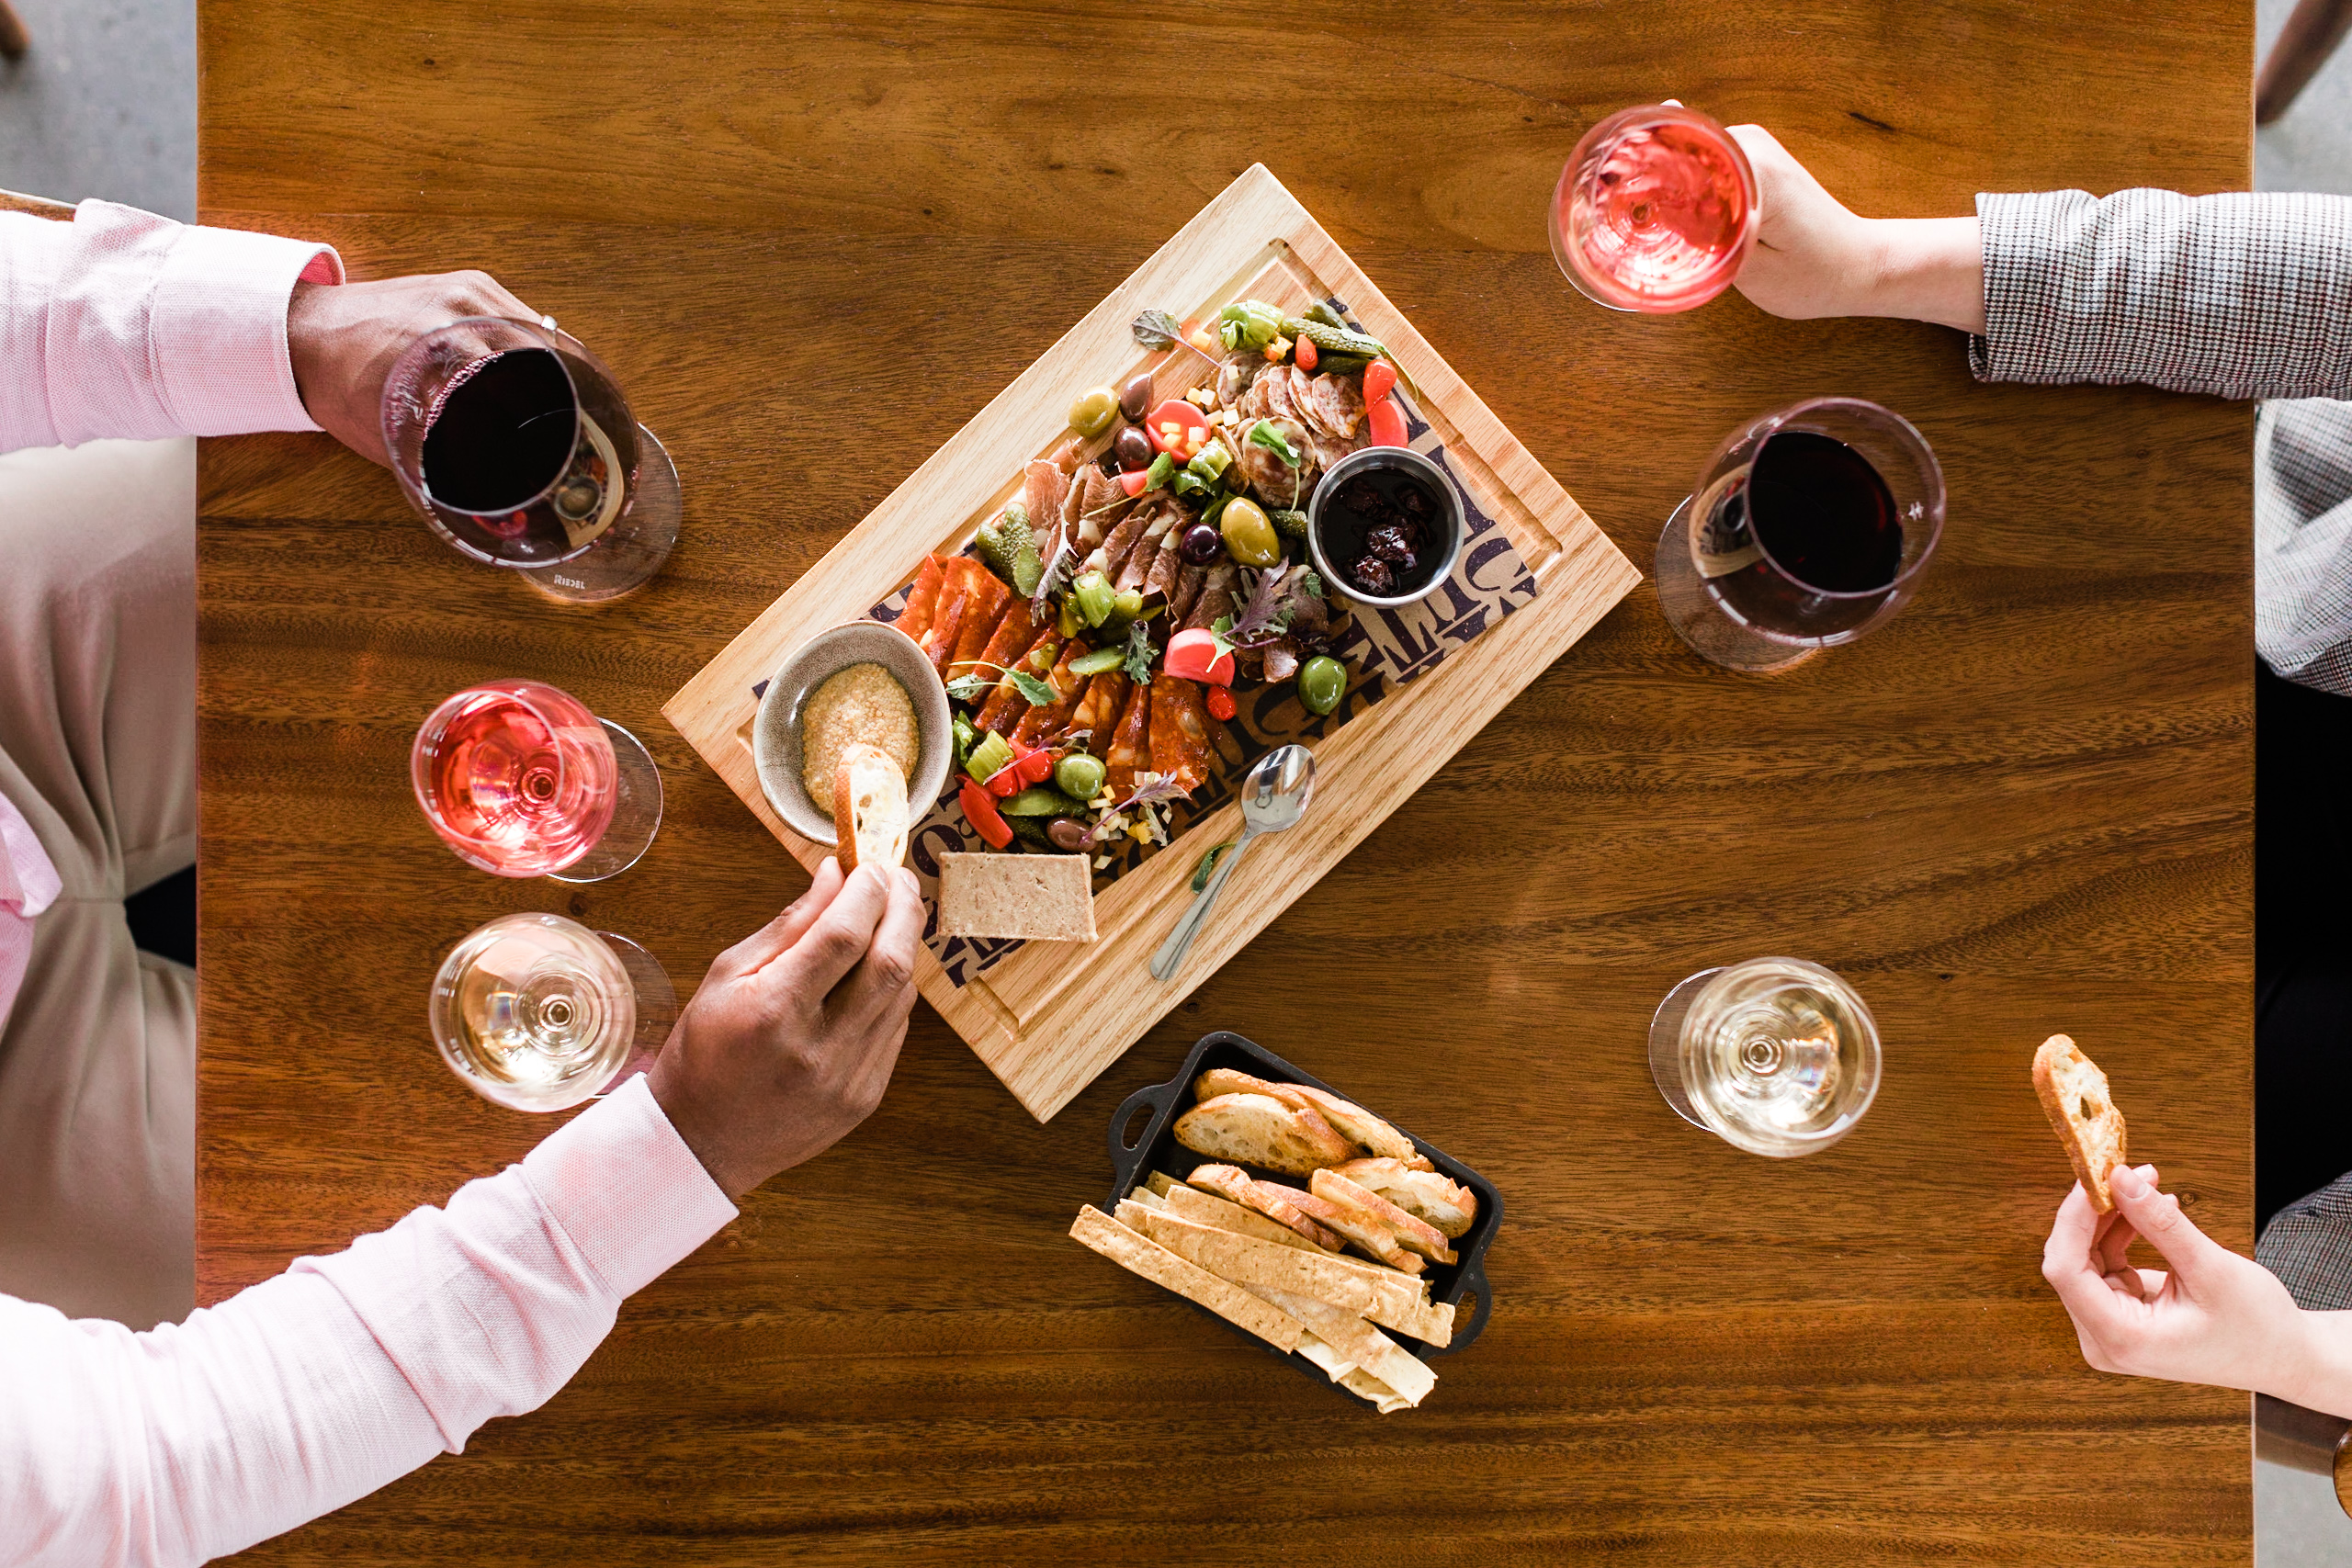 Top down view of a table with drinks and a shared charcuterie board for two diners at Mt. Boucherie Estate Winery in Kelowna